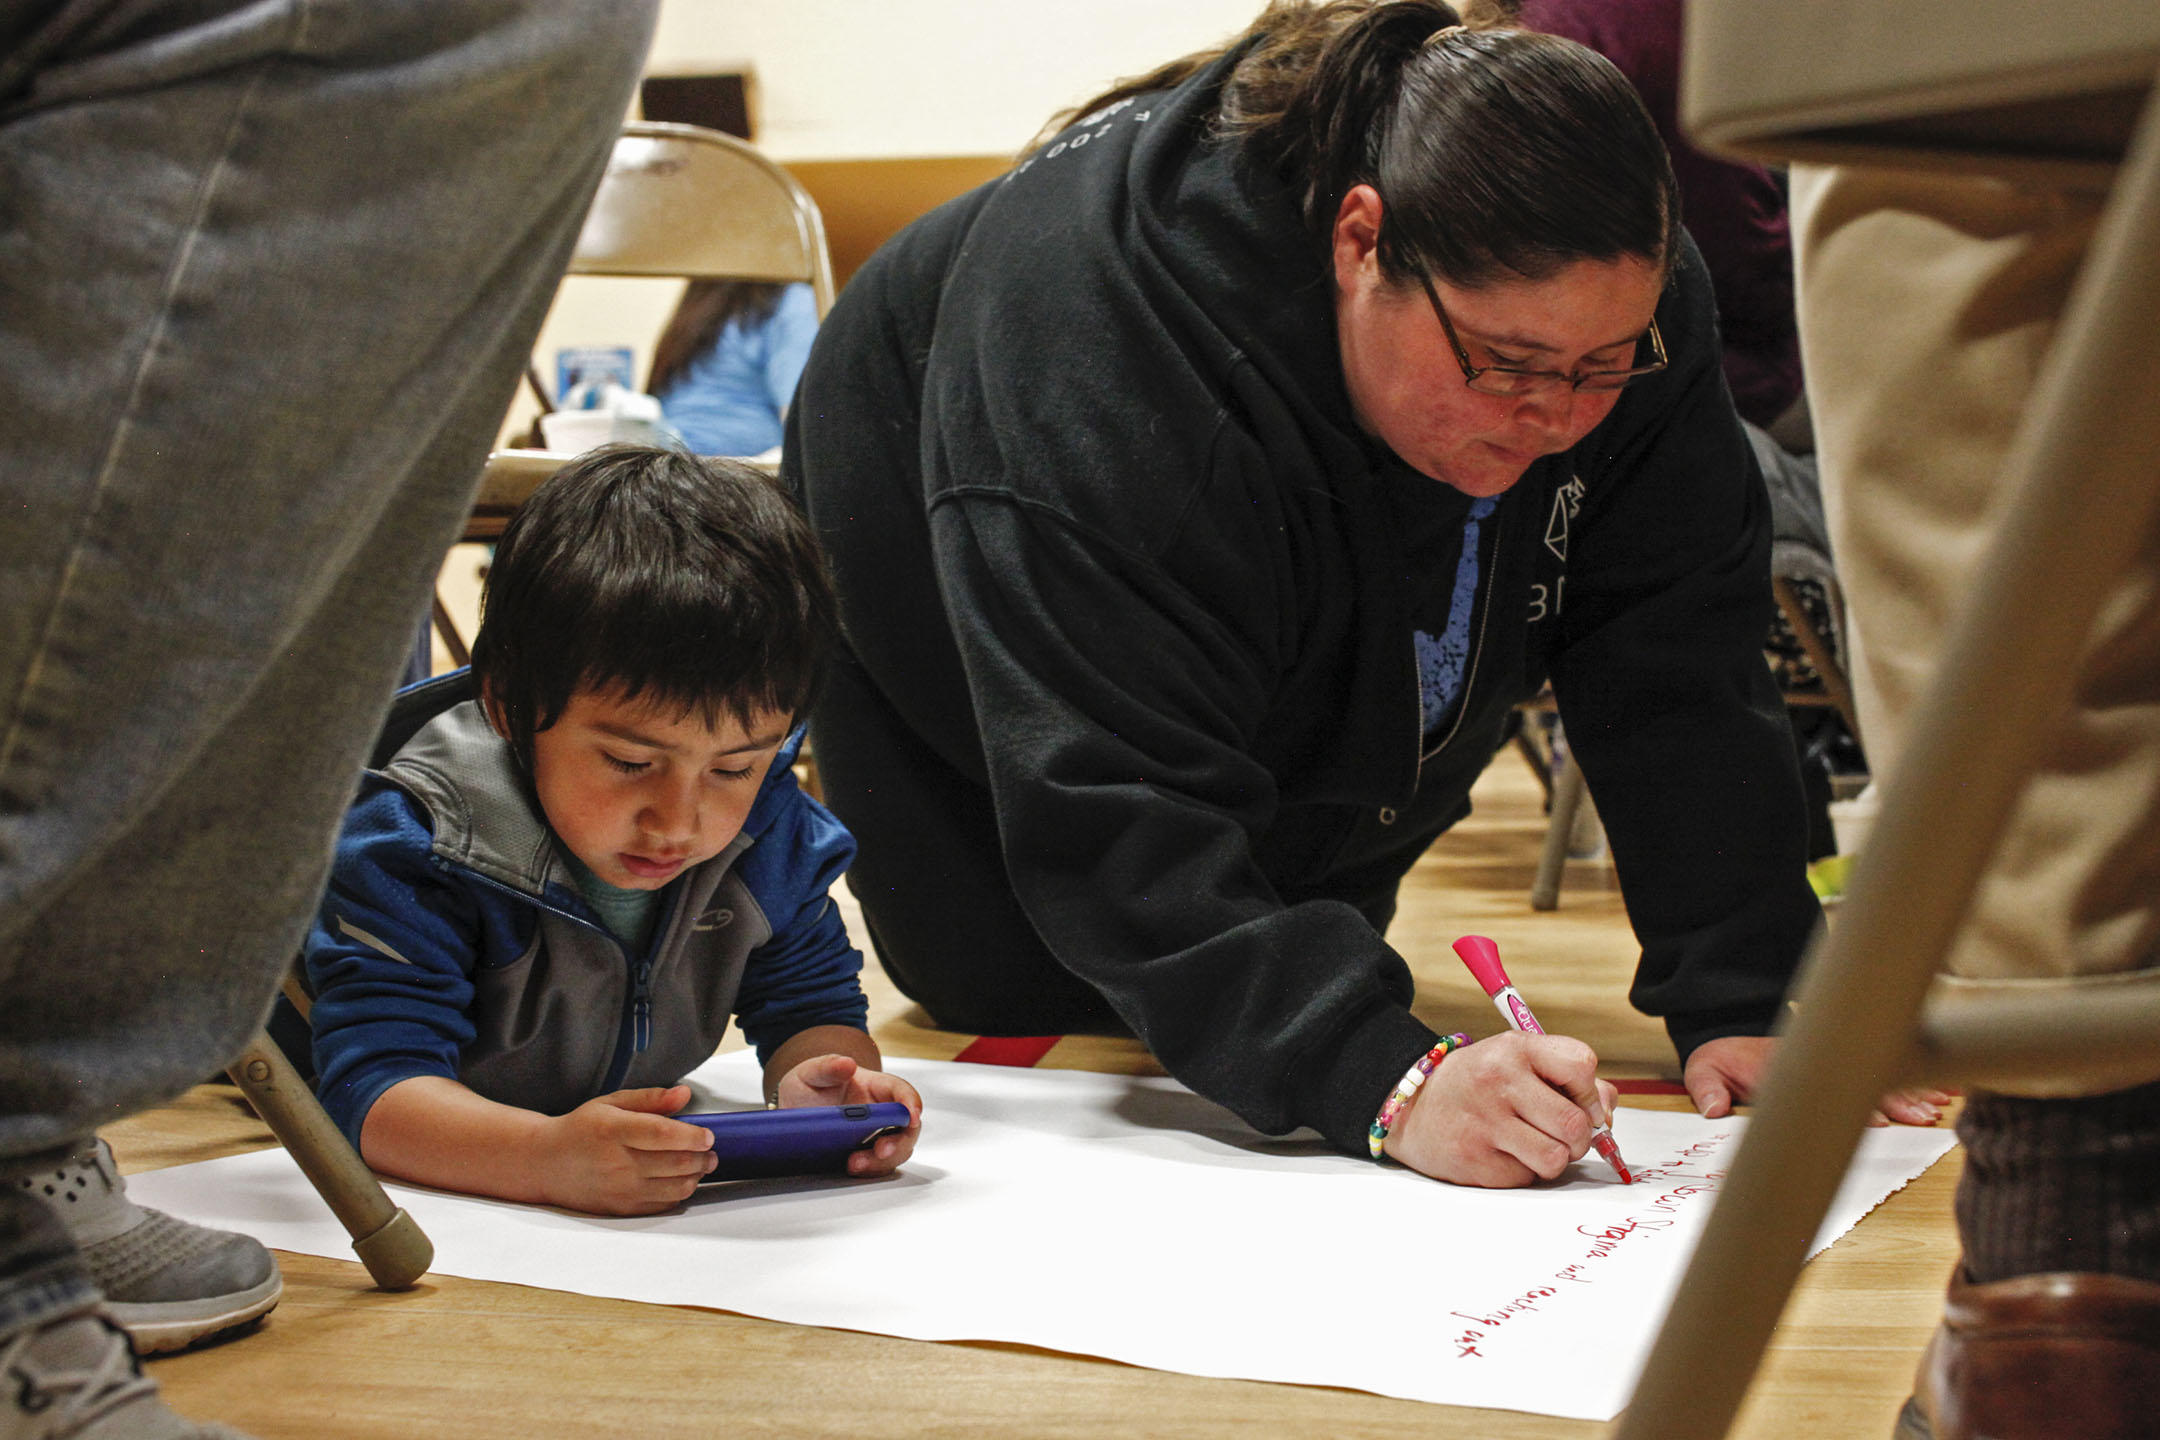 Megan Inmee, 26, and her nephew brainstorm ideas to combat suicide and mental illness on the Flathead Indian Reservation. Inmee lost her father to suicide in February. “I’m hoping after all this happens, tribal health makes changes so everybody can get the help they need,” Inmee said.